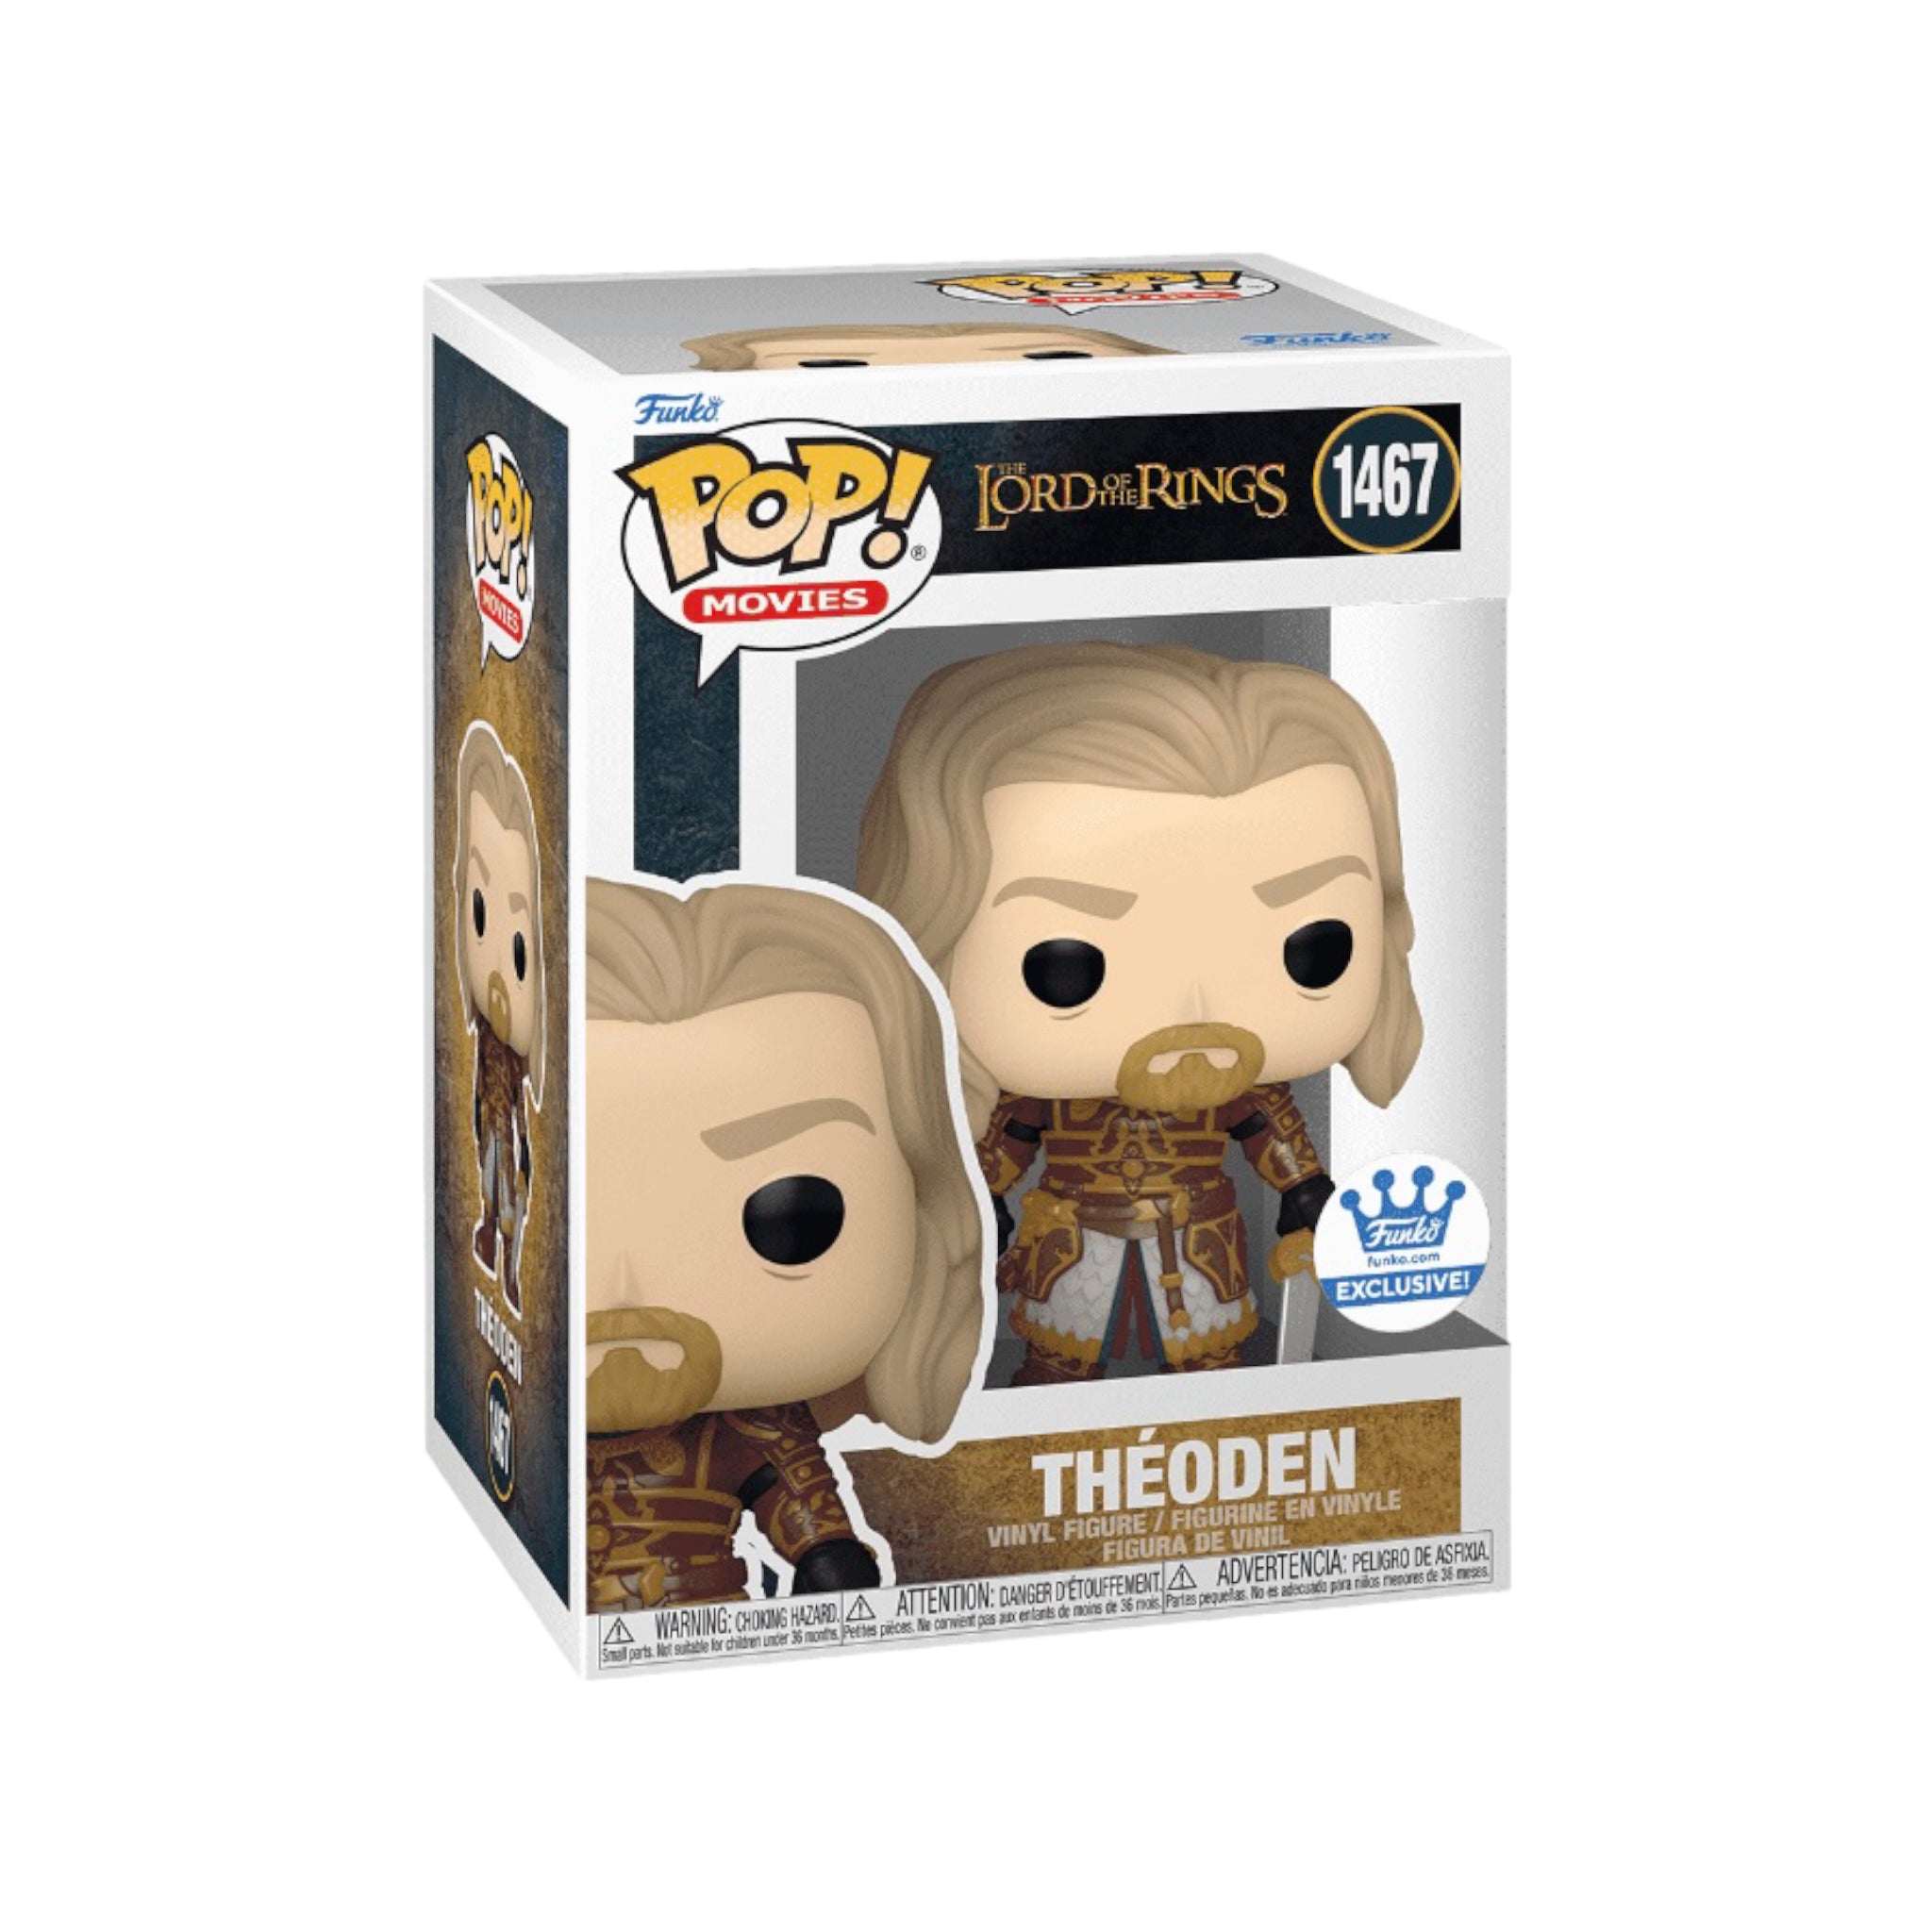 Théoden #1467 Funko Pop! - The Lord of The Rings - Funko Shop Exclusive